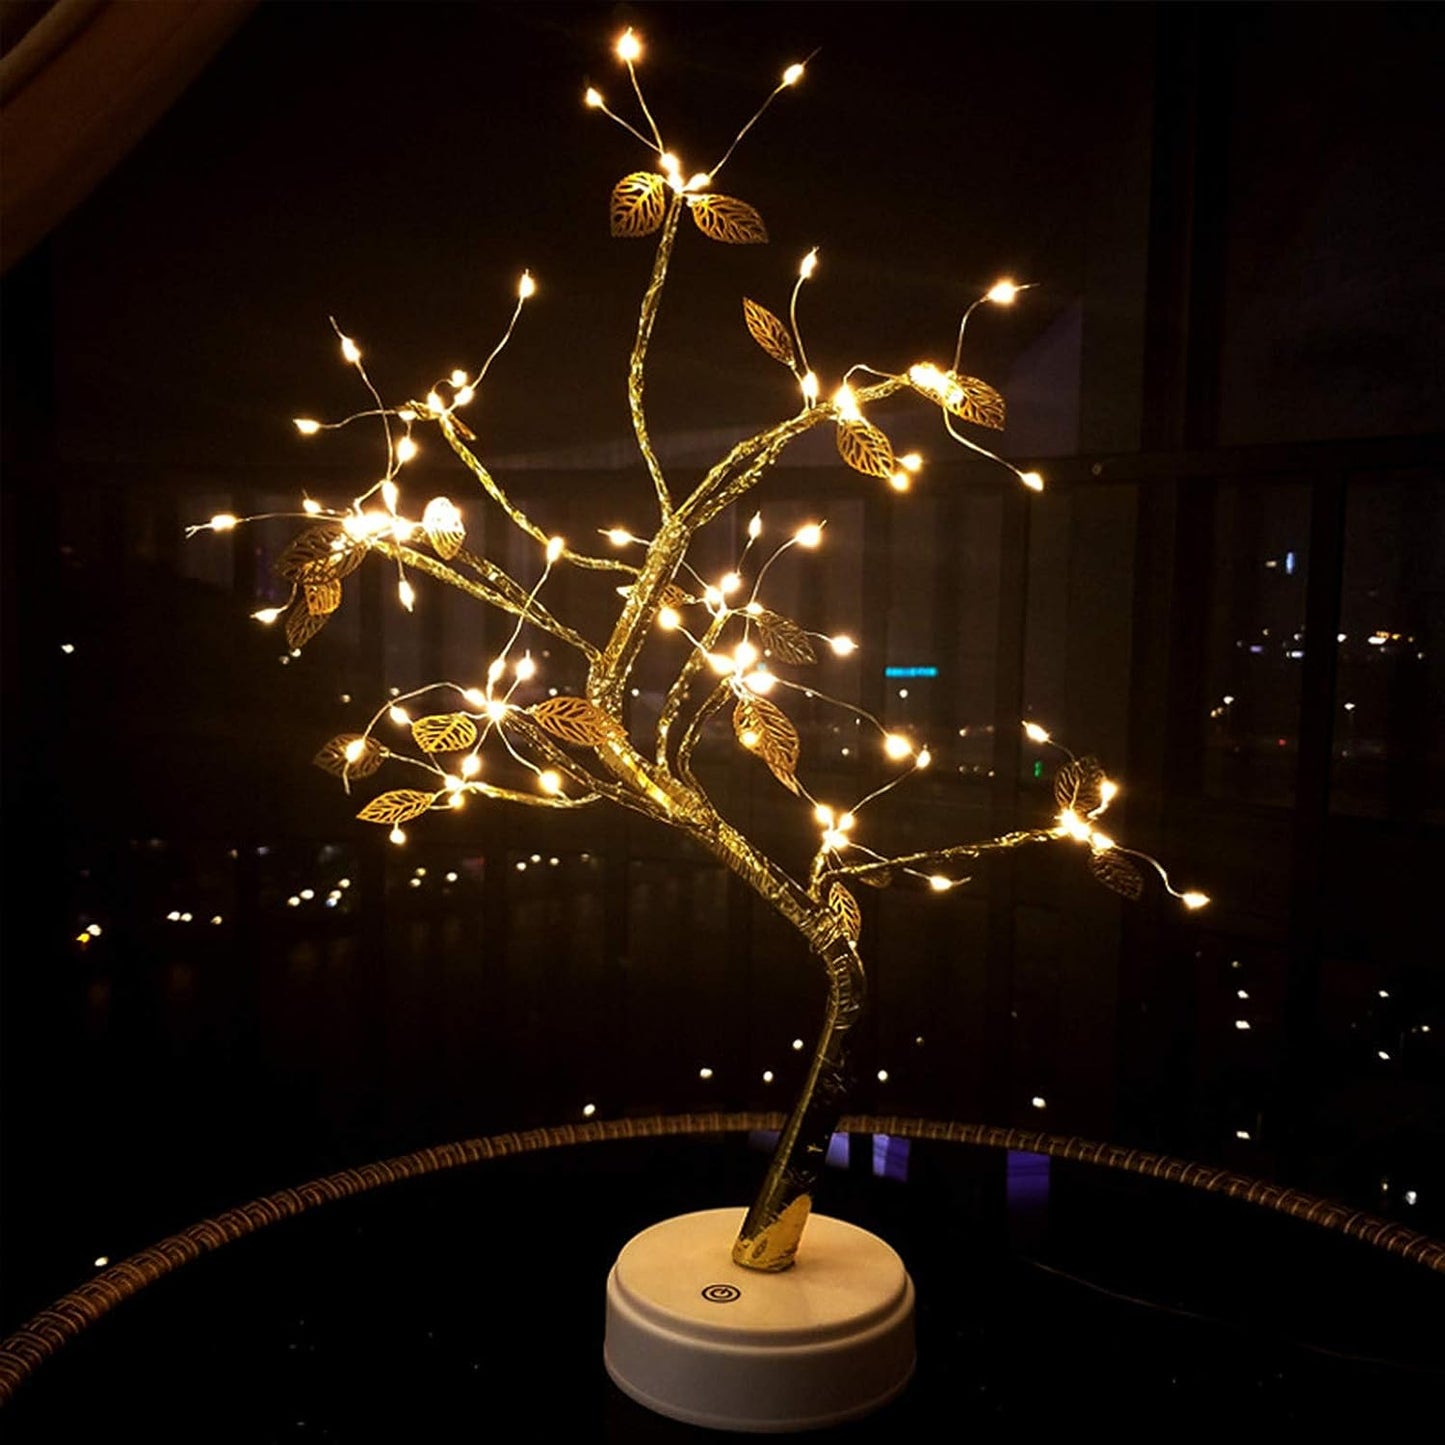 20" Tabletop Bonsai Tree Light with 72 LED Copper Wire String Lights, Touch Switch, USB or Battery Powered (Golden Leaf)